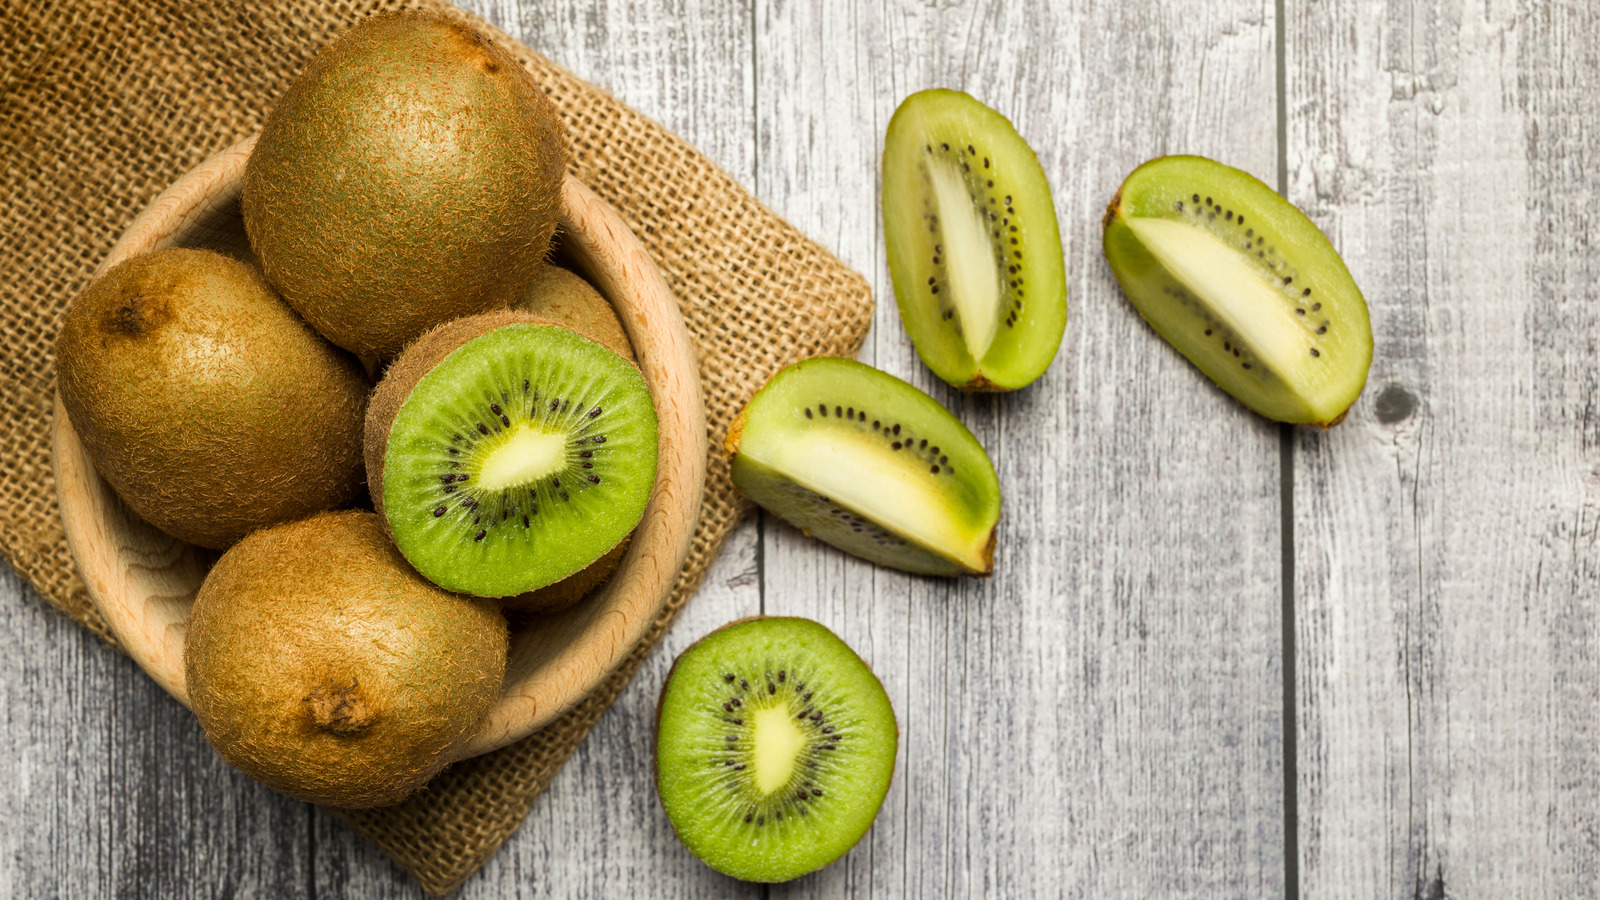 Do you know what health benefits the Kiwi fruit has?